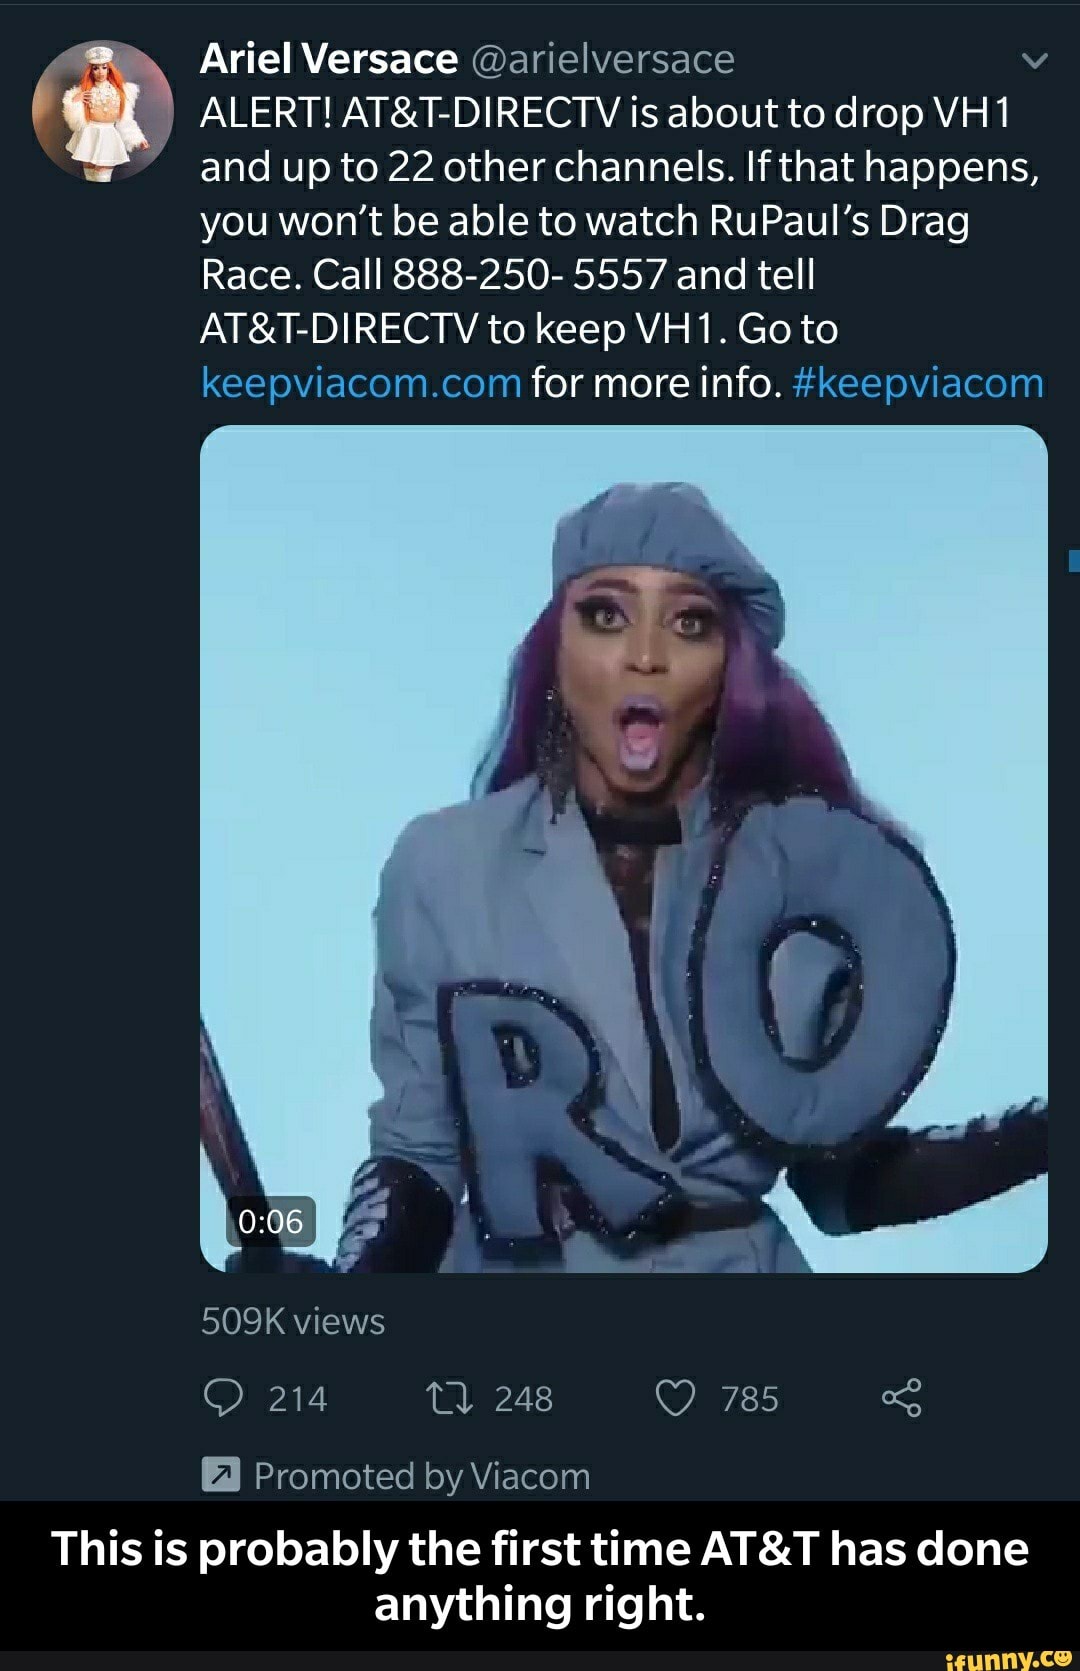 Vh1 on direct tv